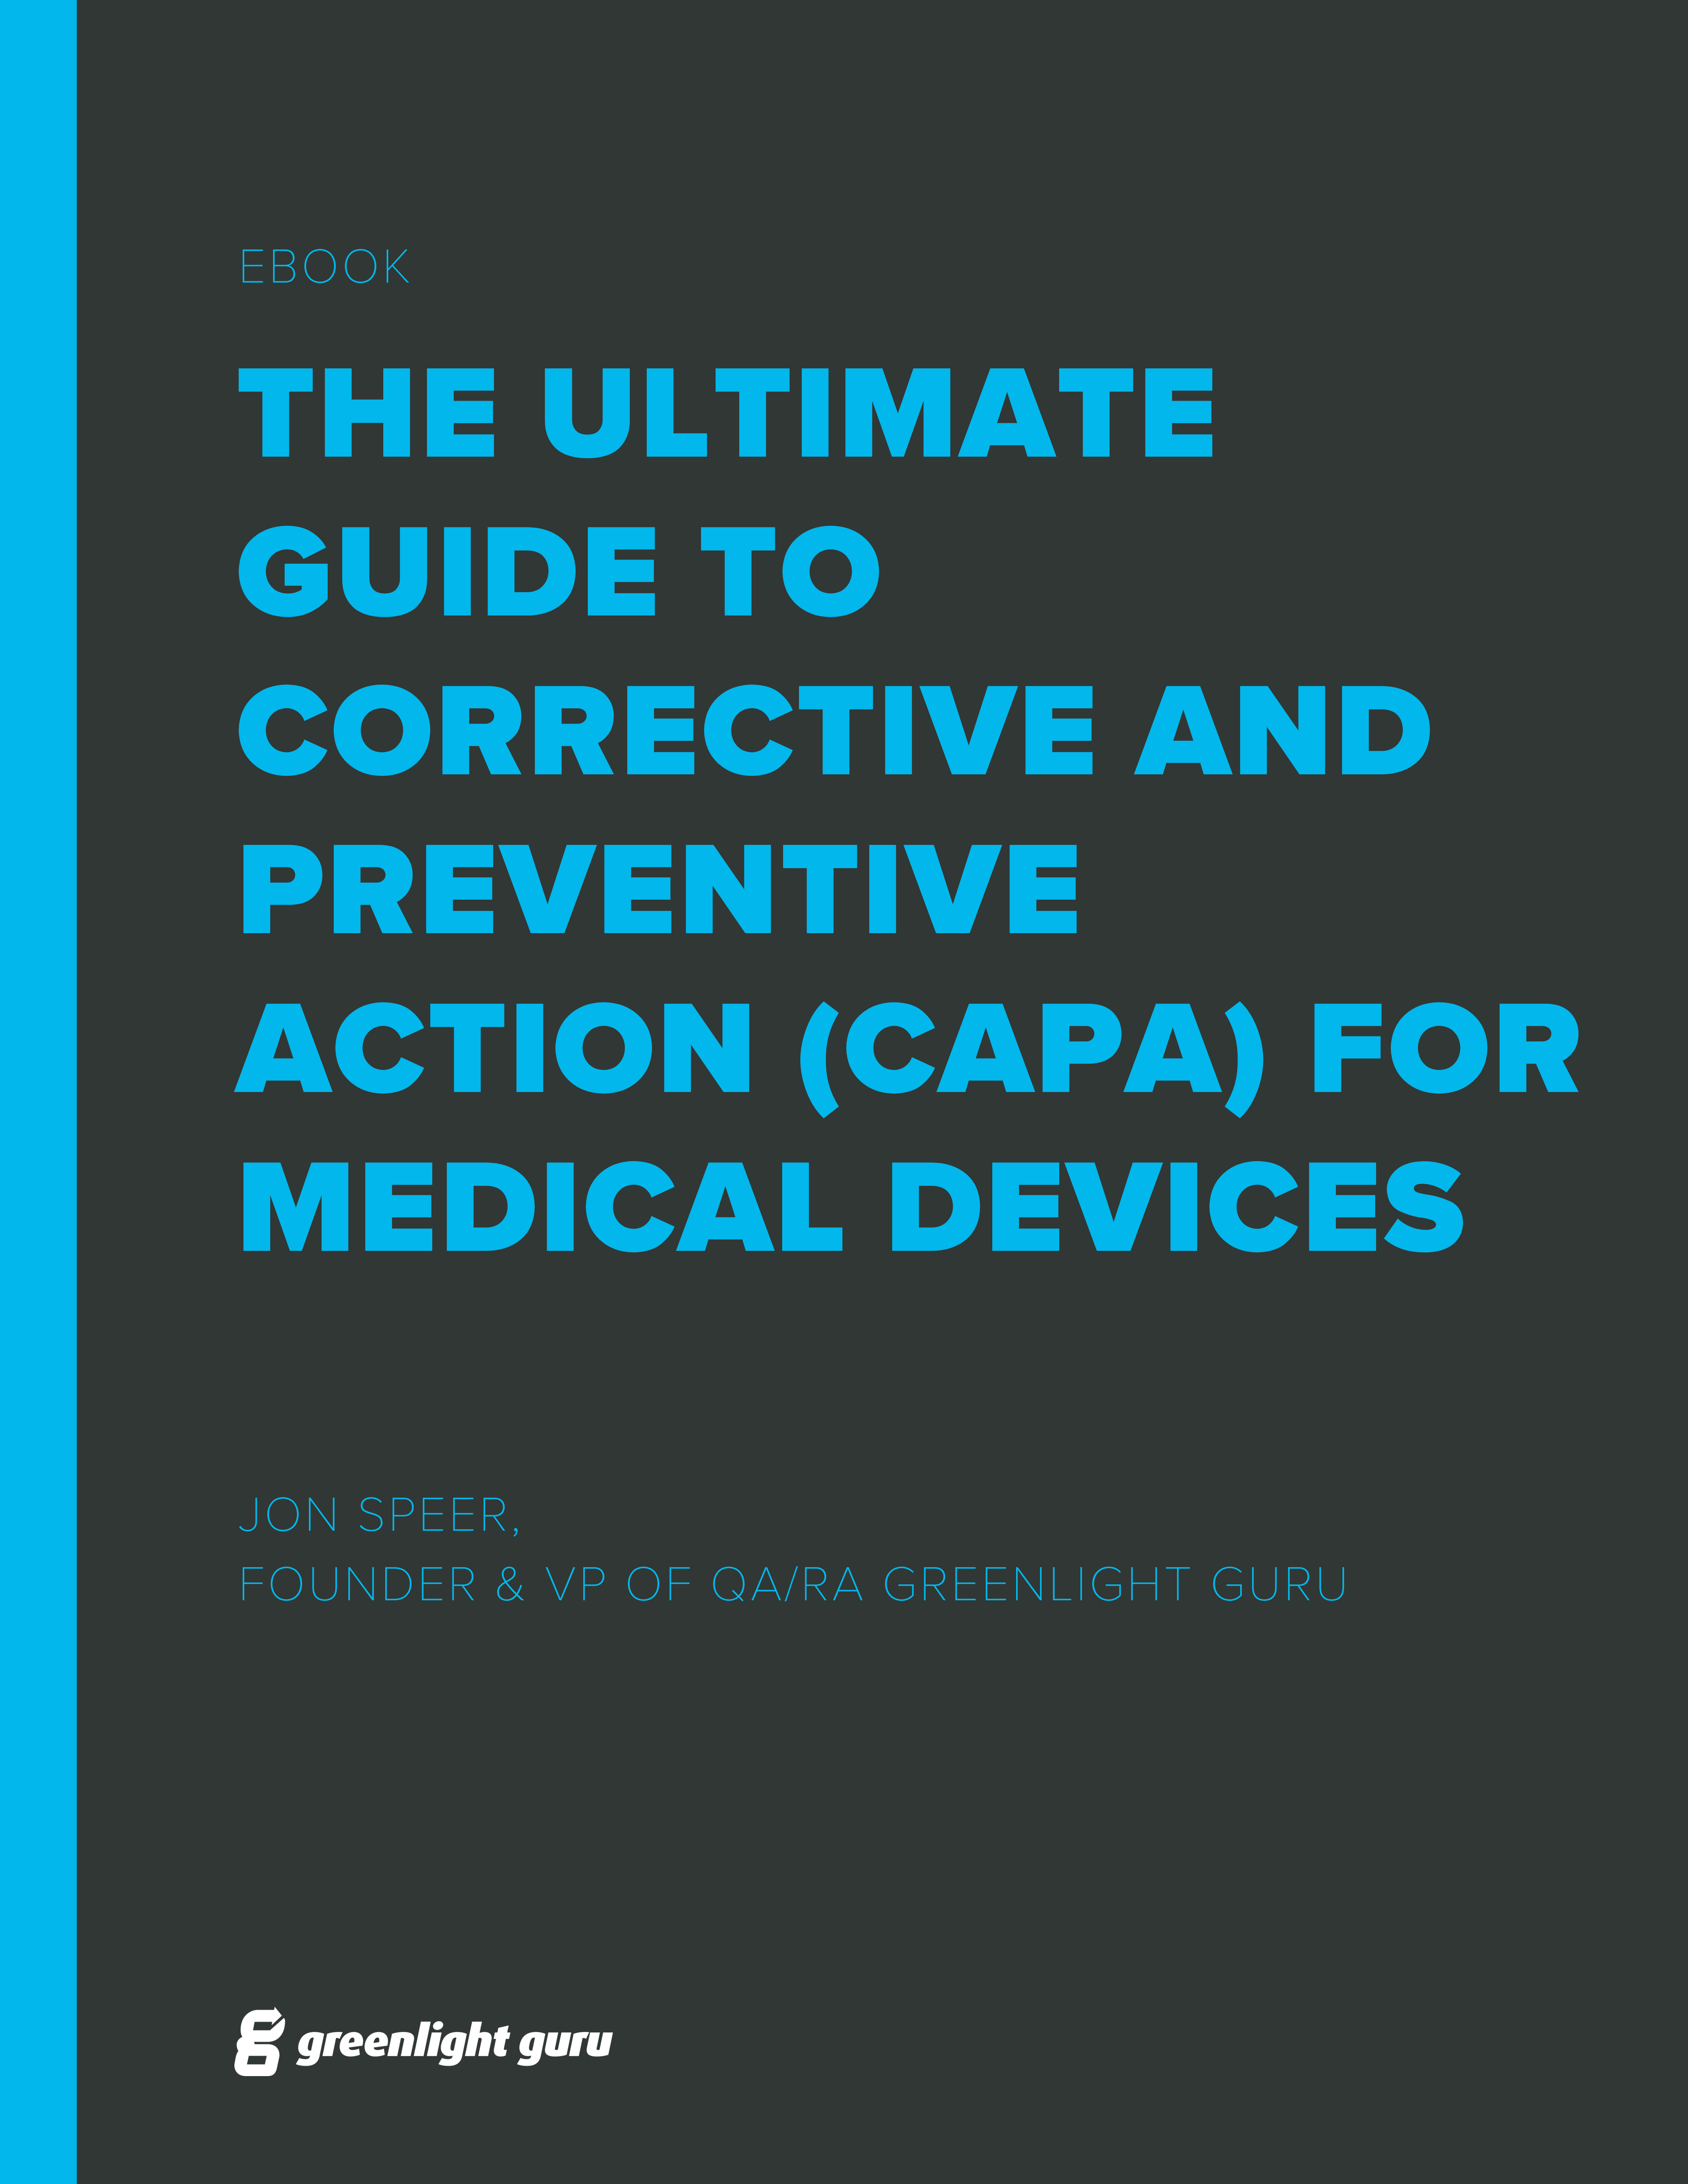 guide to corrective and preventive action (CAPA) for medical devices